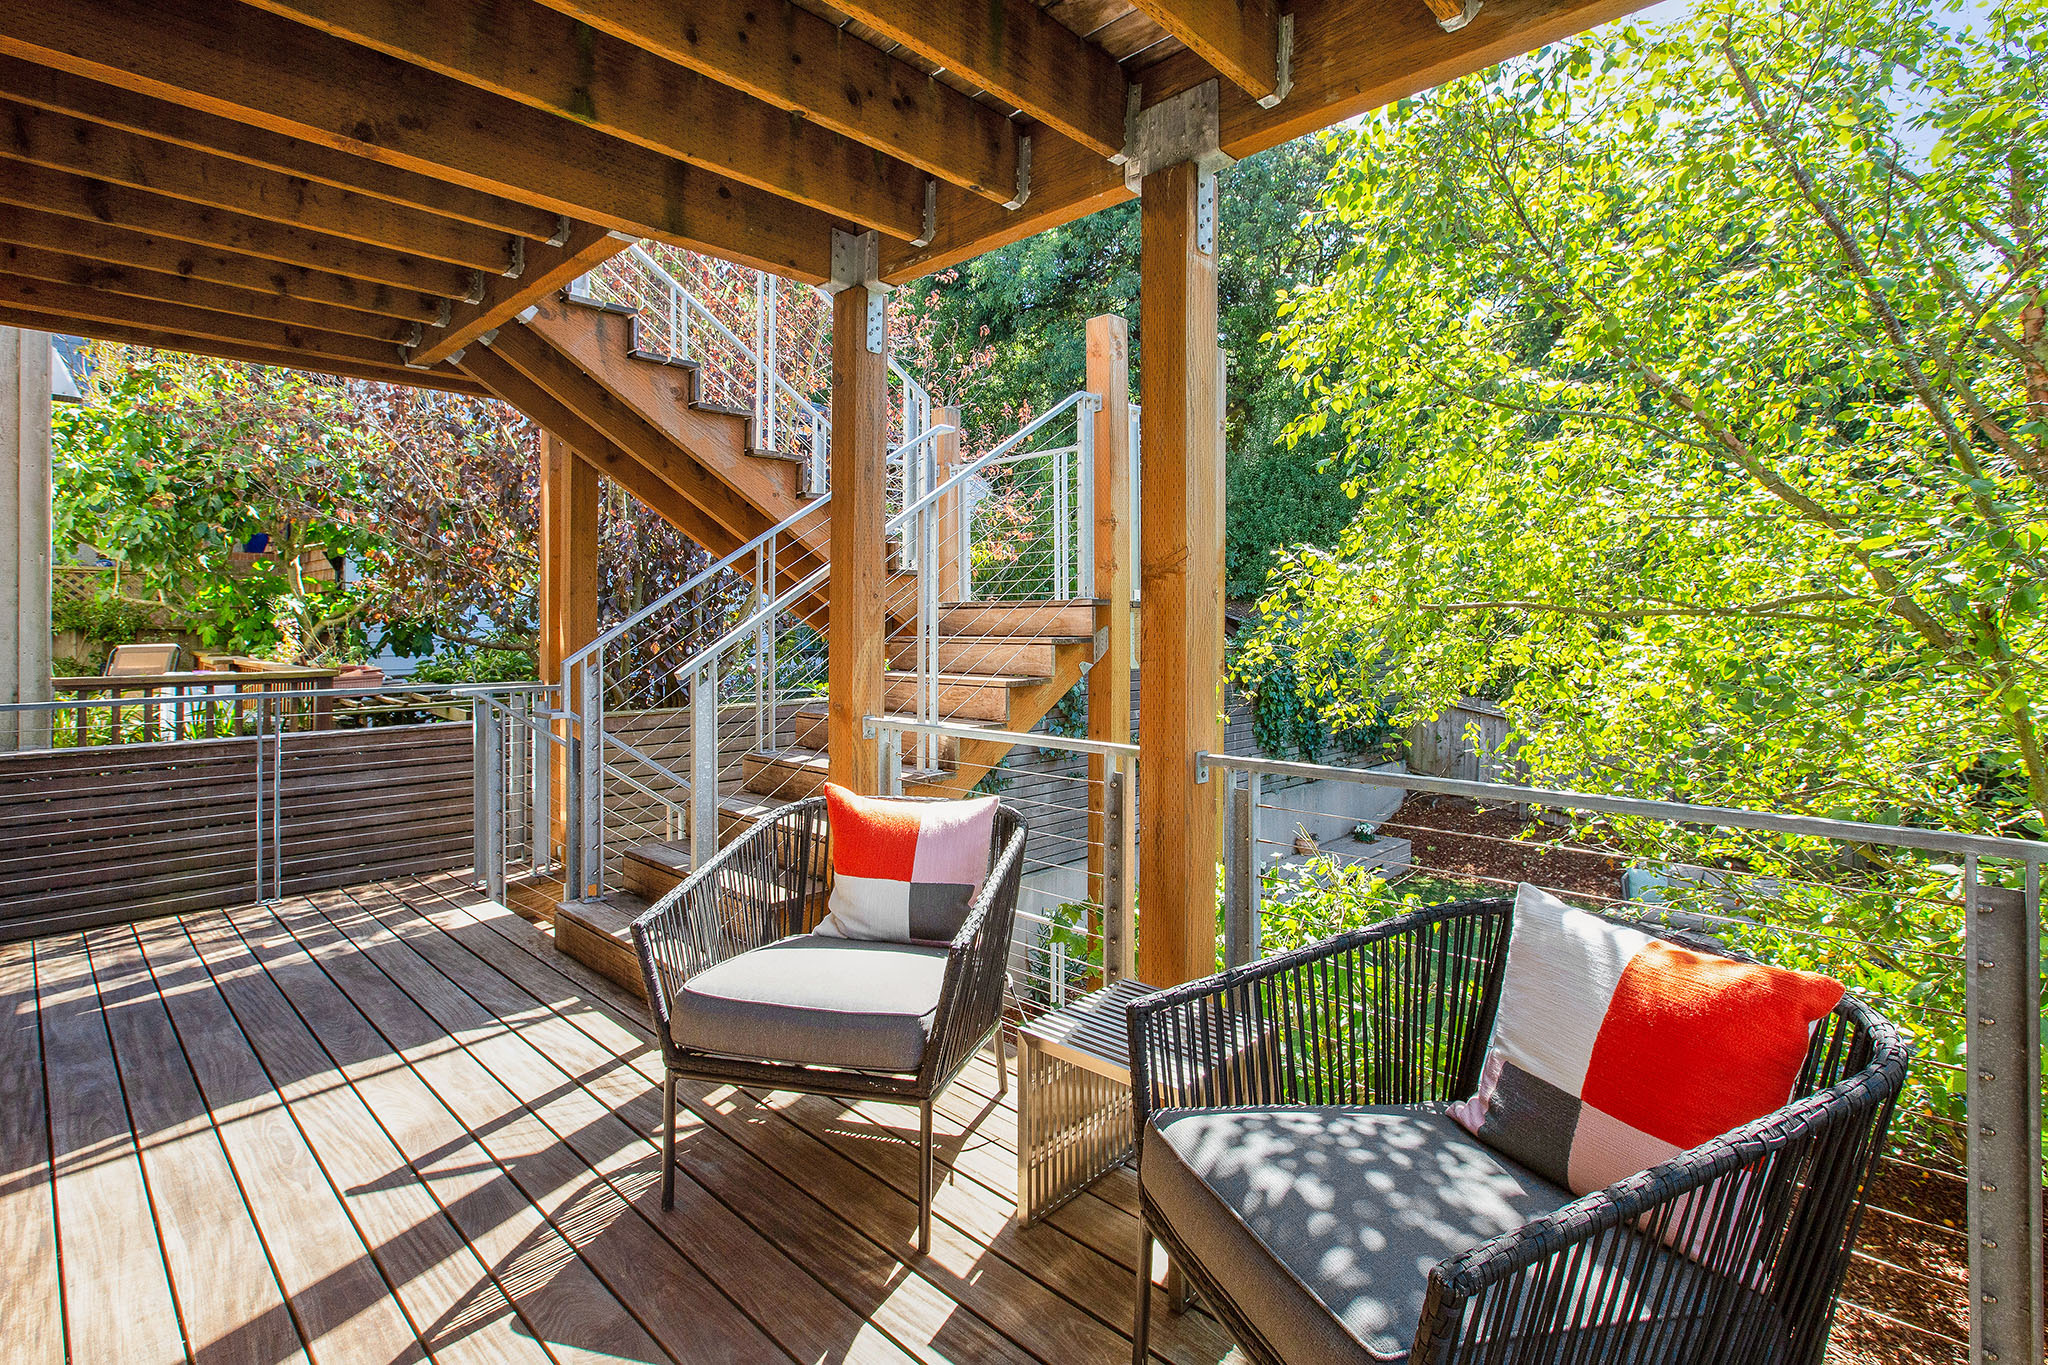 Property Photo: Deck area. There is a sitting area with chair and love seat. 